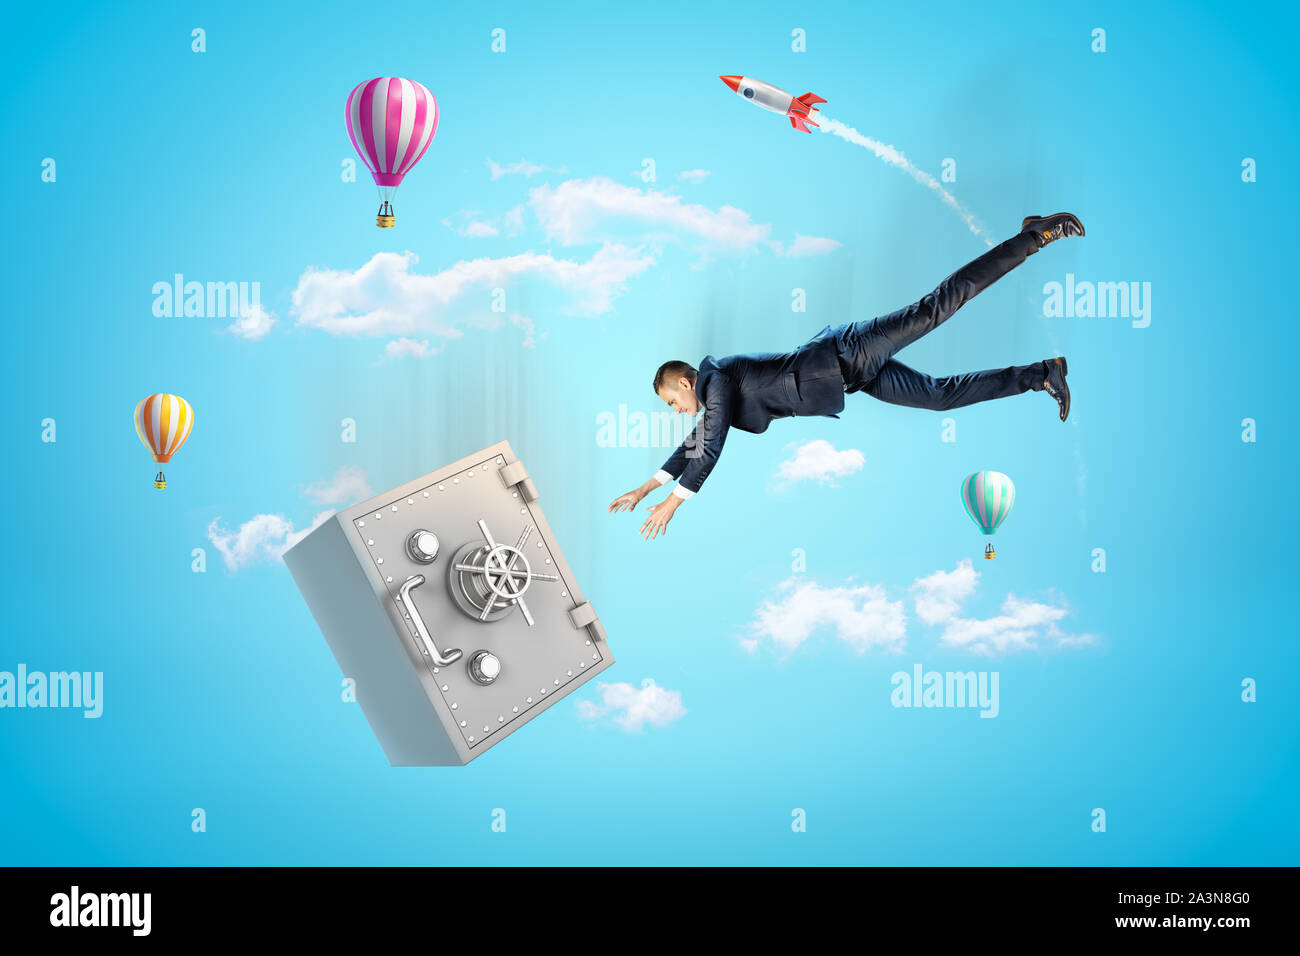 Young businessman falling down in blue sky trying to catch big metal safe, with hot air balloons and rocket in background. Stock Photo